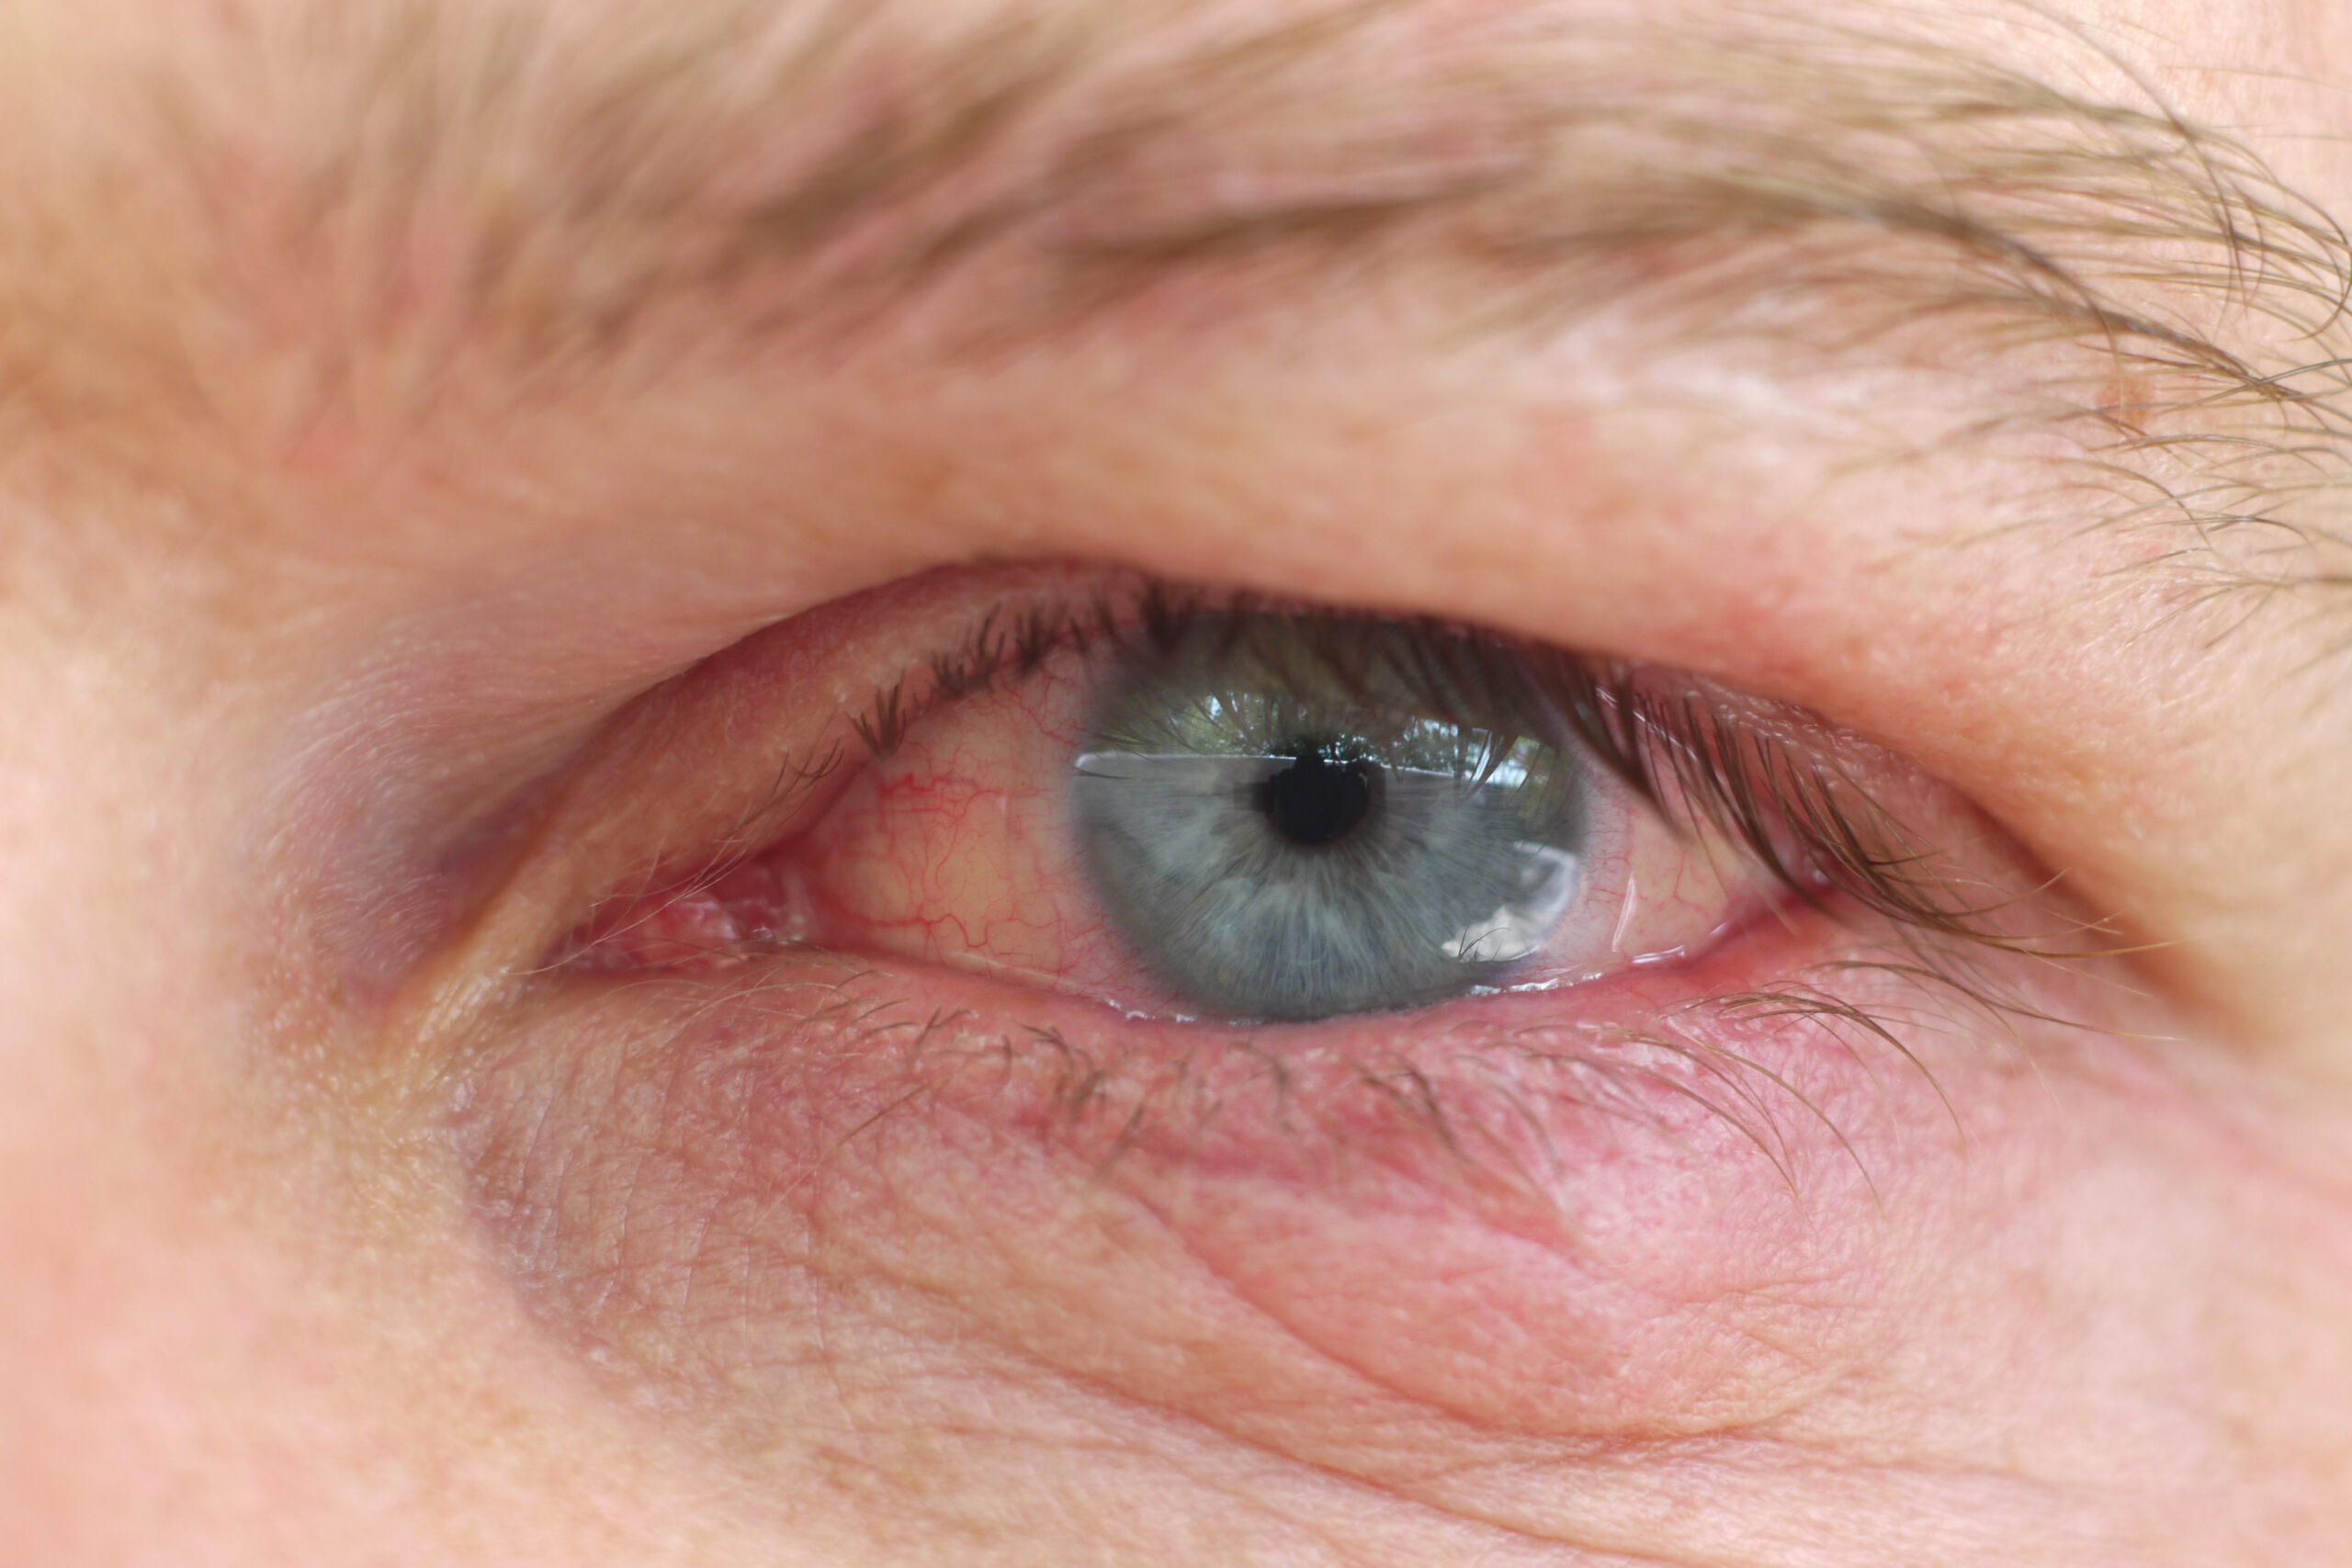 Eye infection / Infection of an eyelid on an eye with contact lens